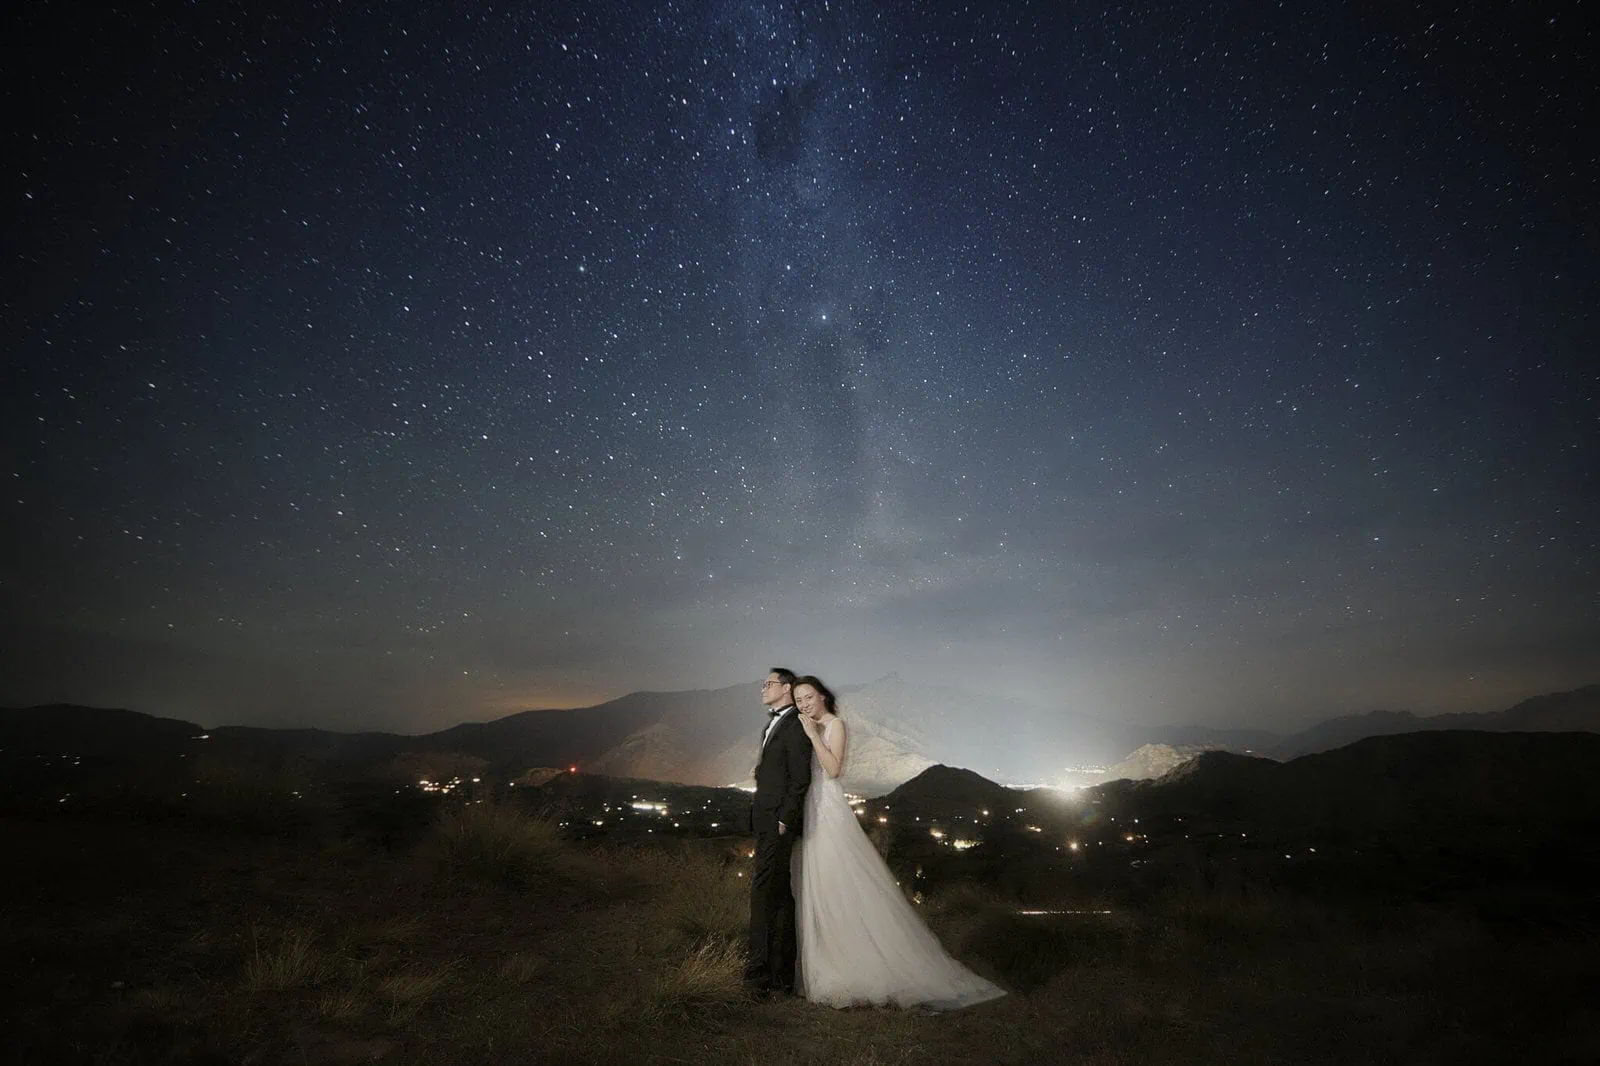 Queenstown New Zealand Elopement Wedding Photographer - A bride and groom posing for a starry night shoot under the milky way, adding to their exquisite portfolio.